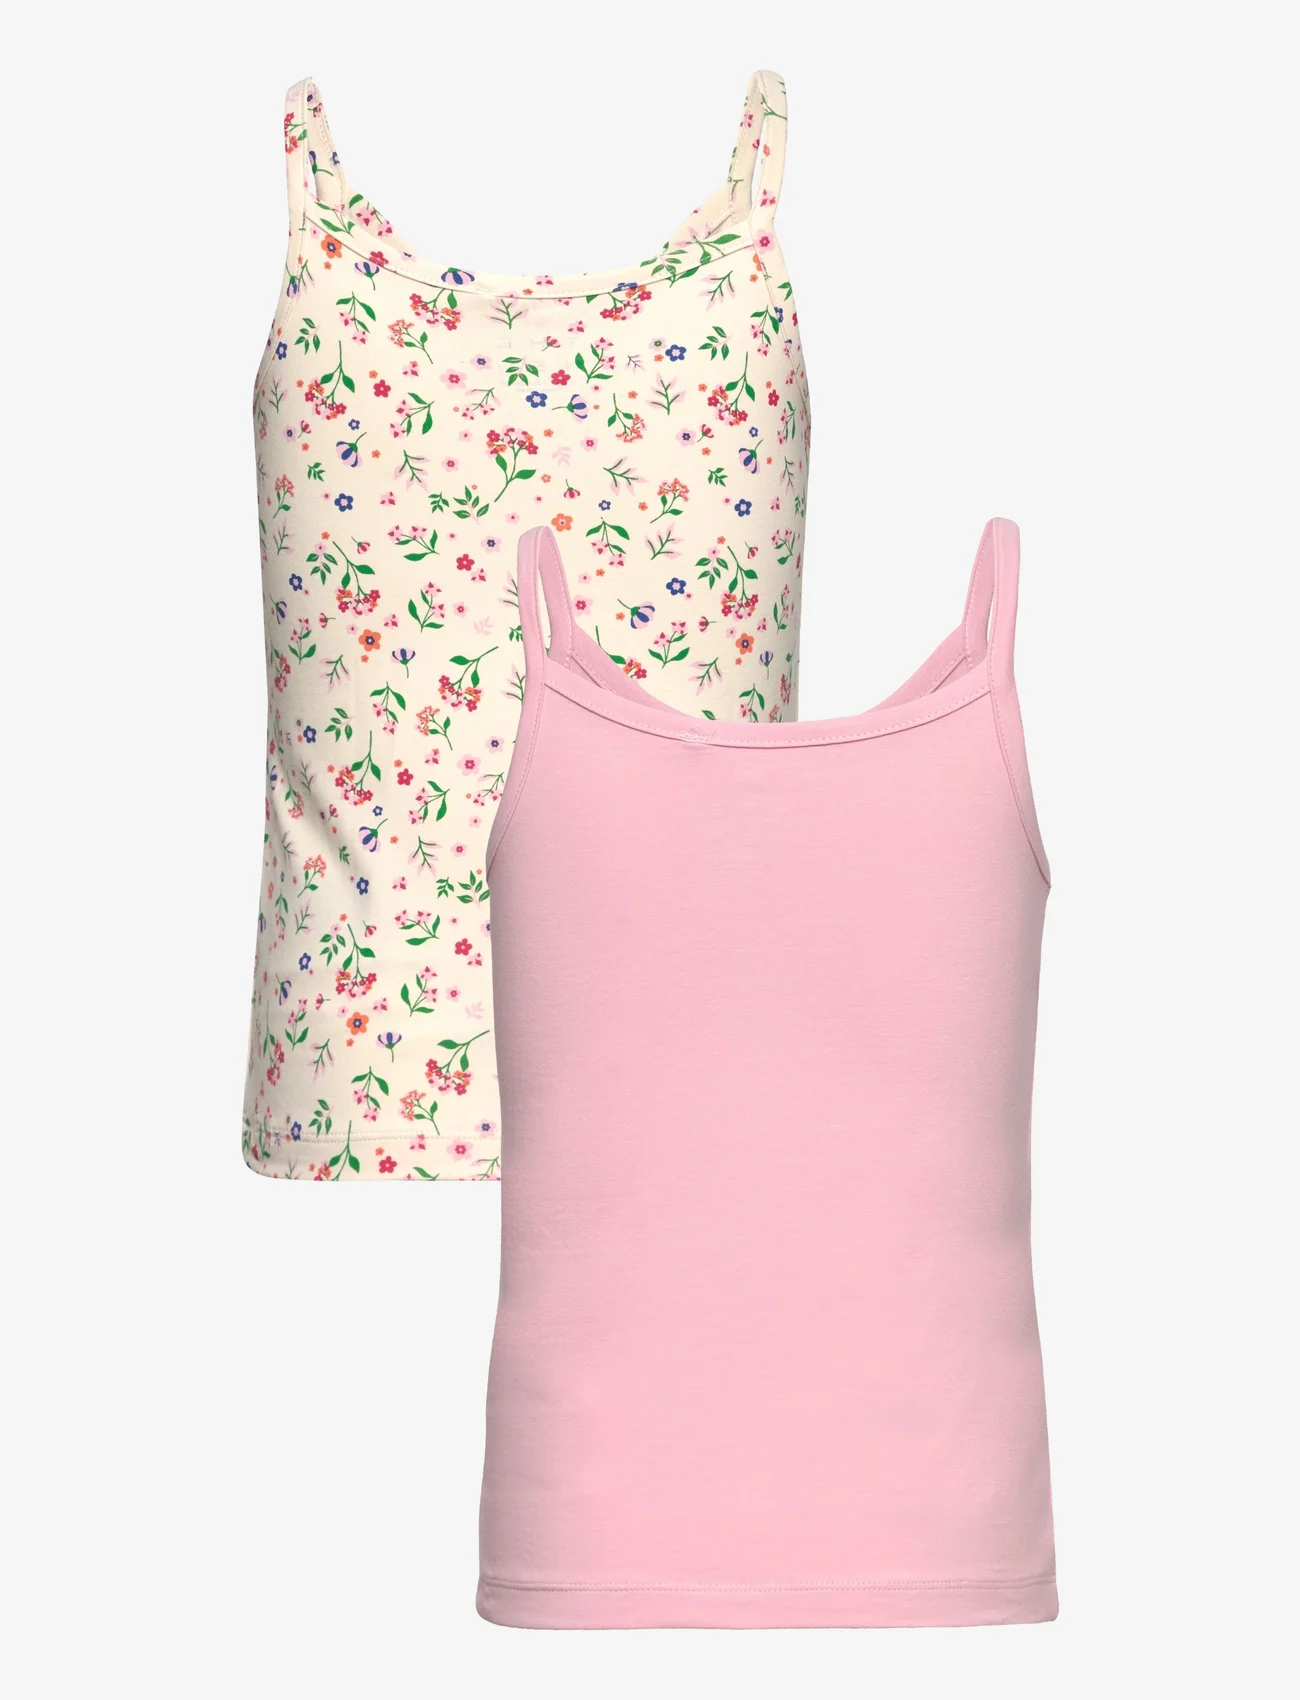 The New - THE NEW Strap Top 2-Pack - tanktops - pink nectar - 1